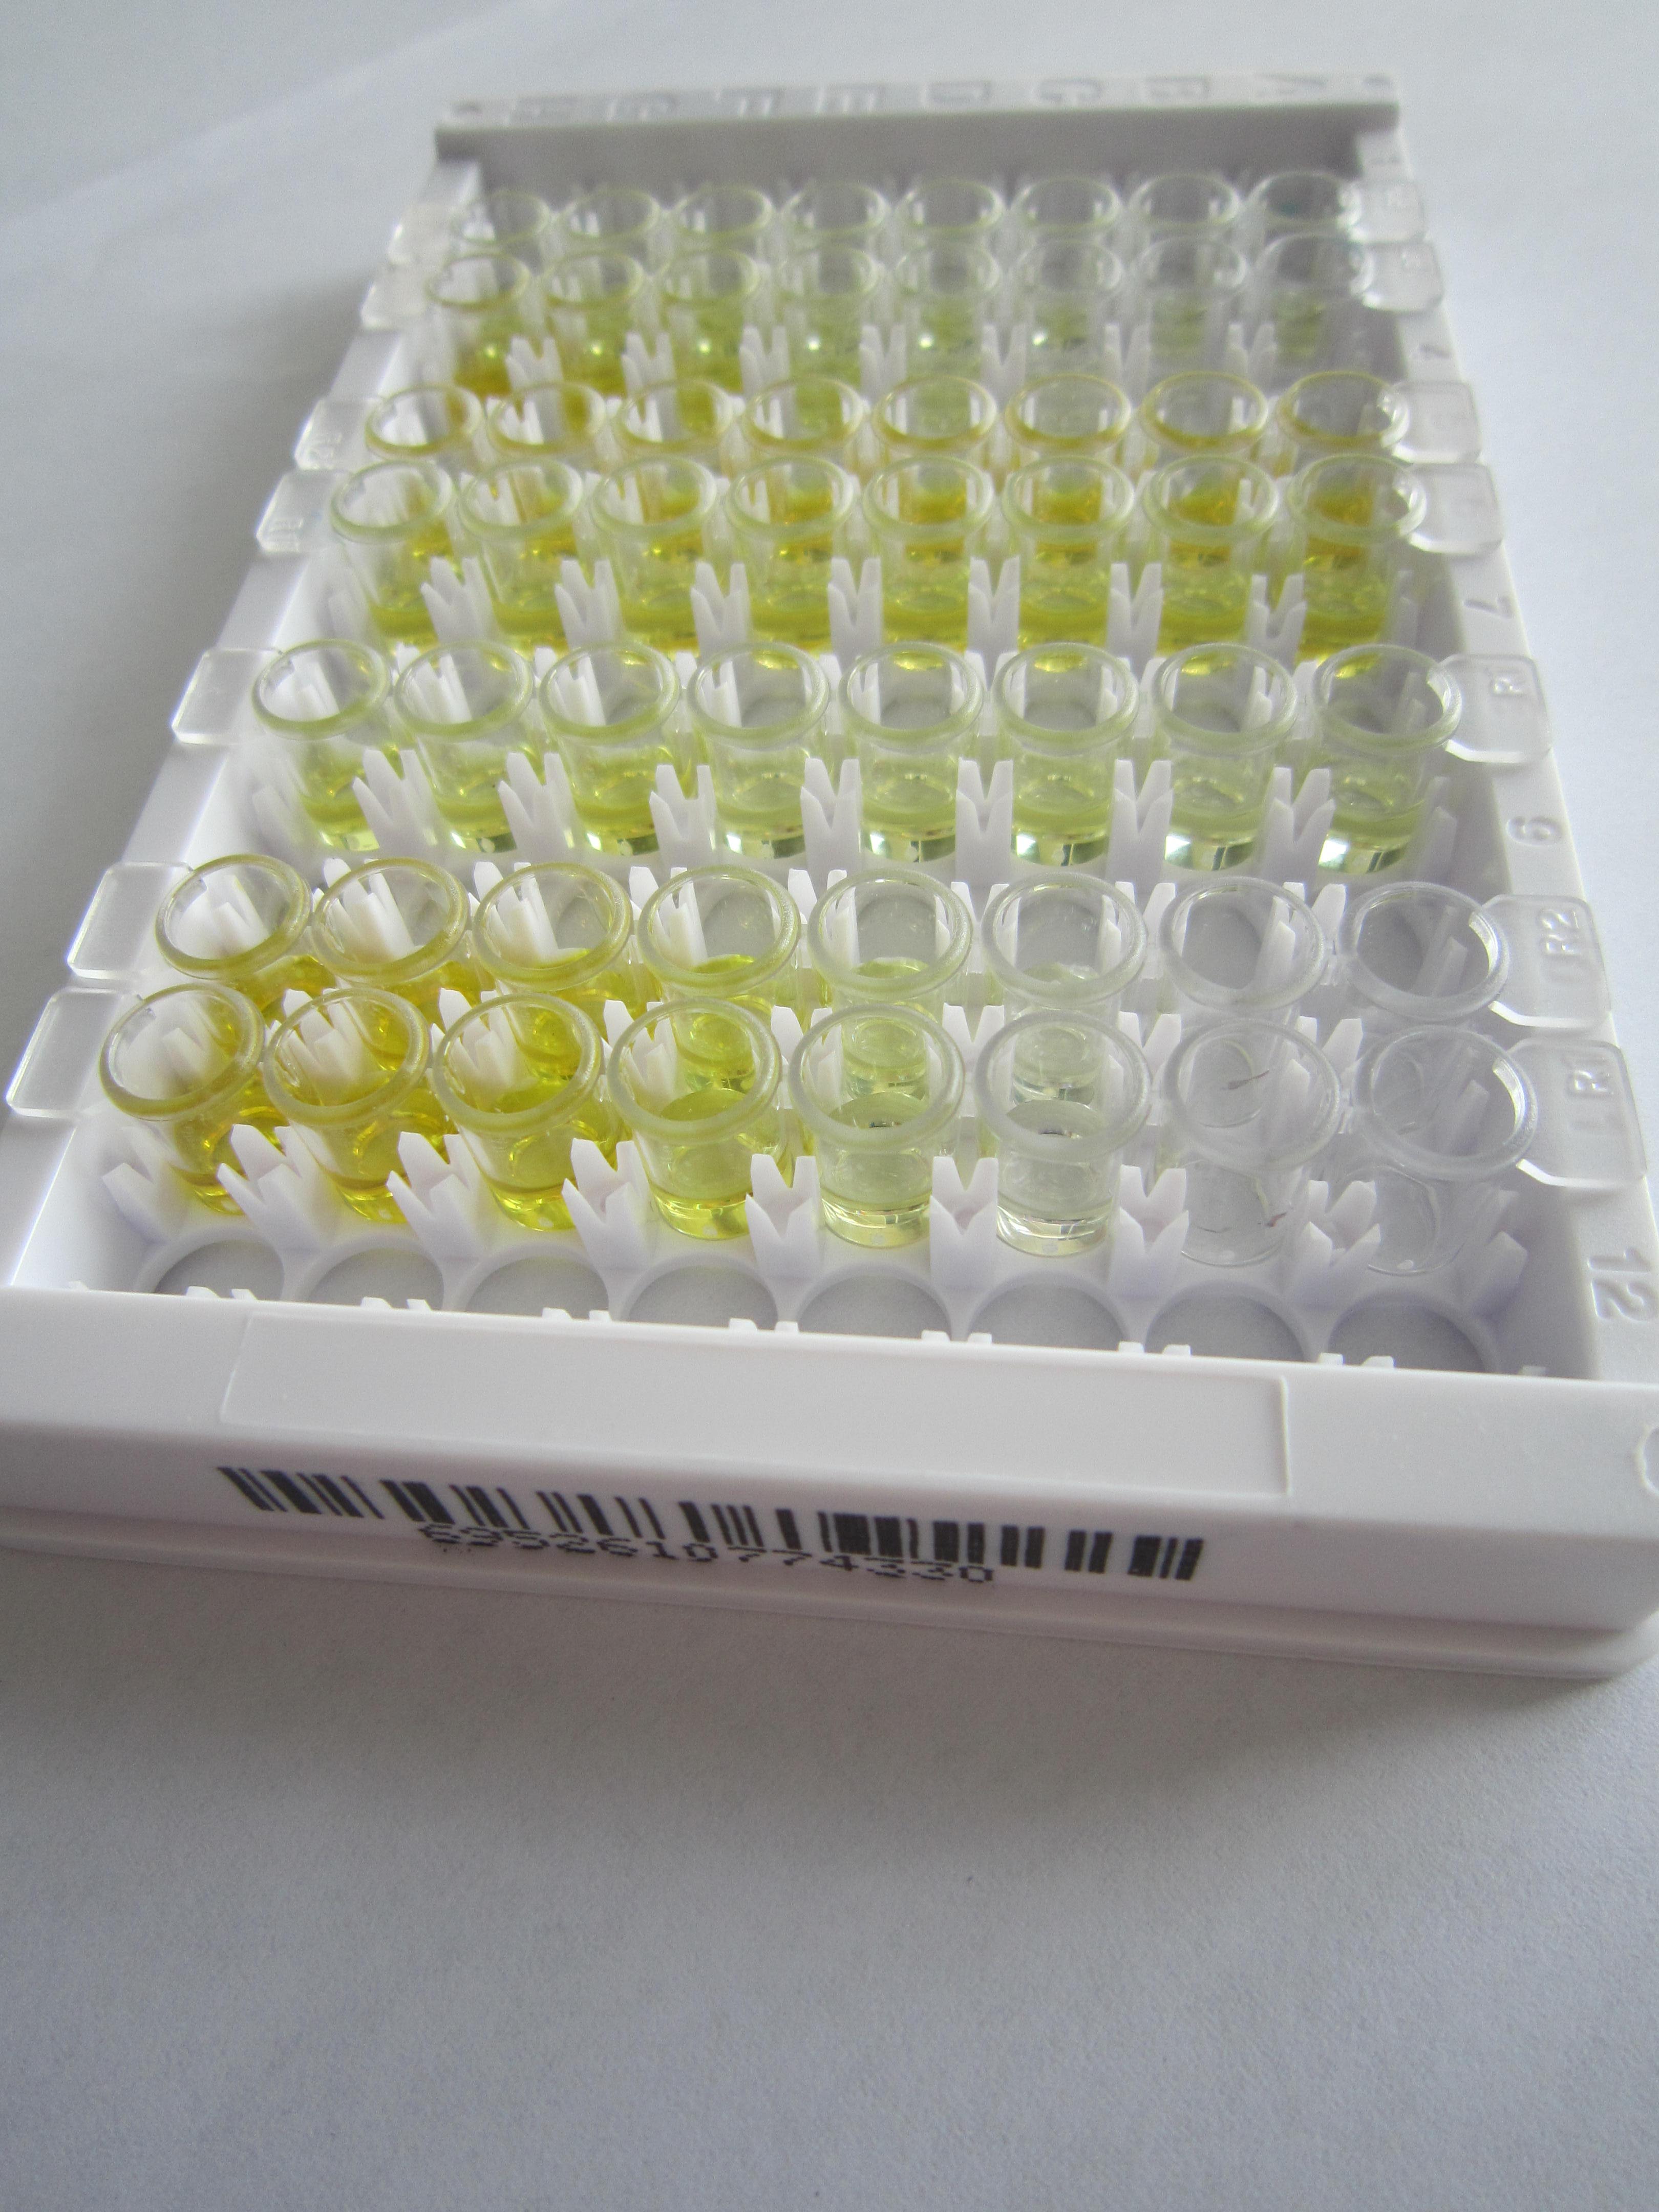 ELISA Kit for Mitochondrial Open Reading Frame Of The 12S rRNA-c (MOTS-c)